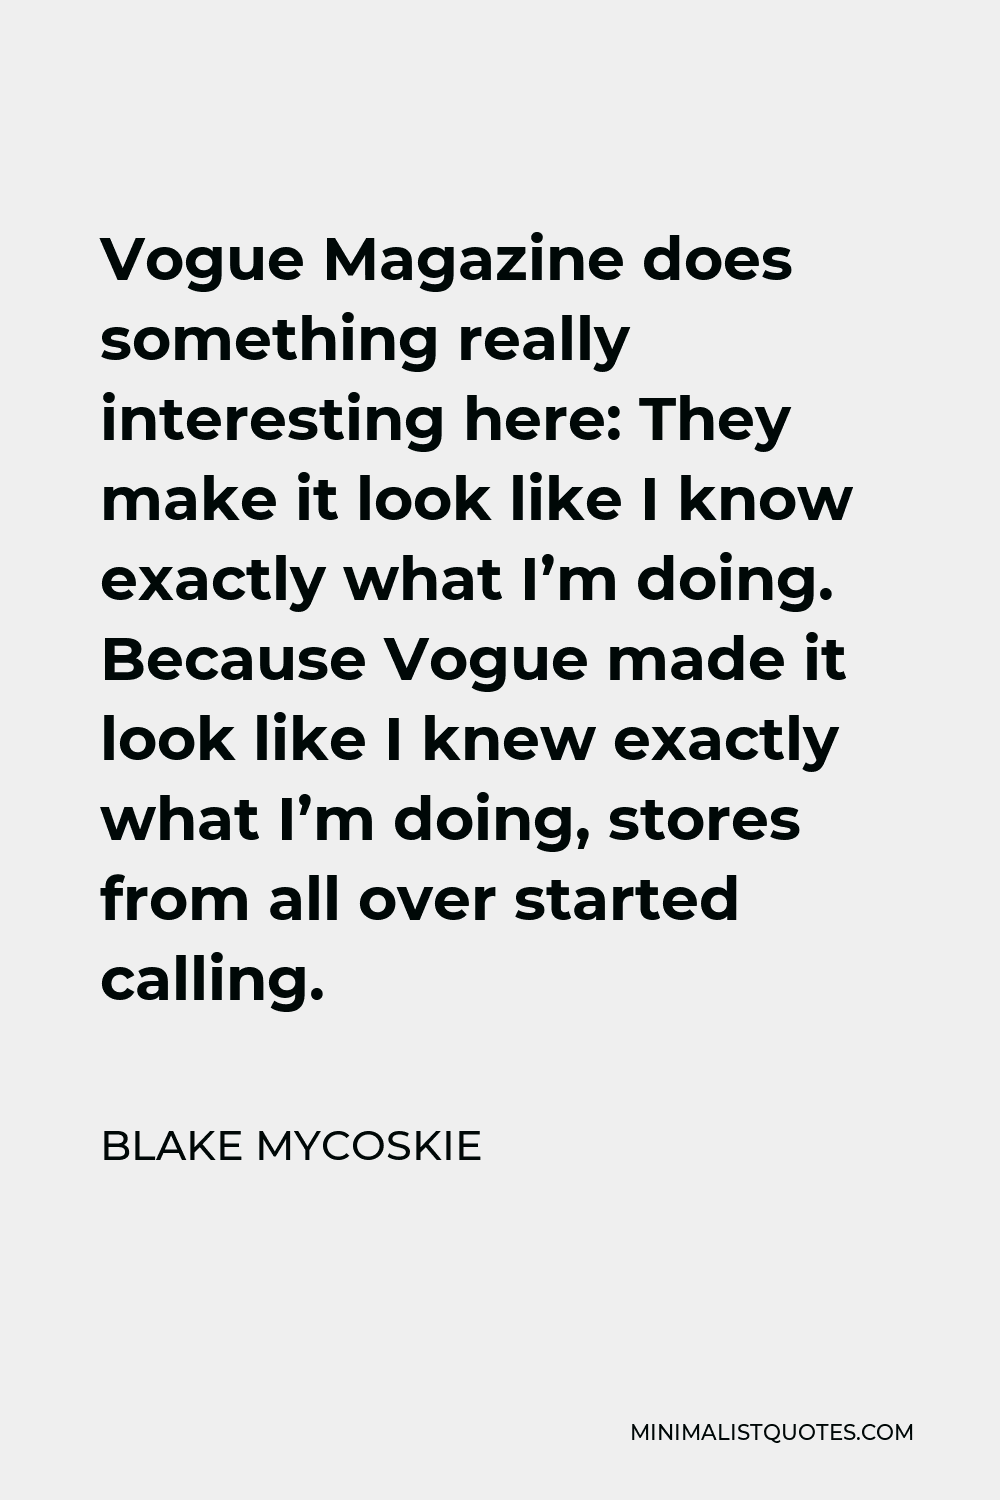 Blake Mycoskie Quote - Vogue Magazine does something really interesting here: They make it look like I know exactly what I’m doing. Because Vogue made it look like I knew exactly what I’m doing, stores from all over started calling.